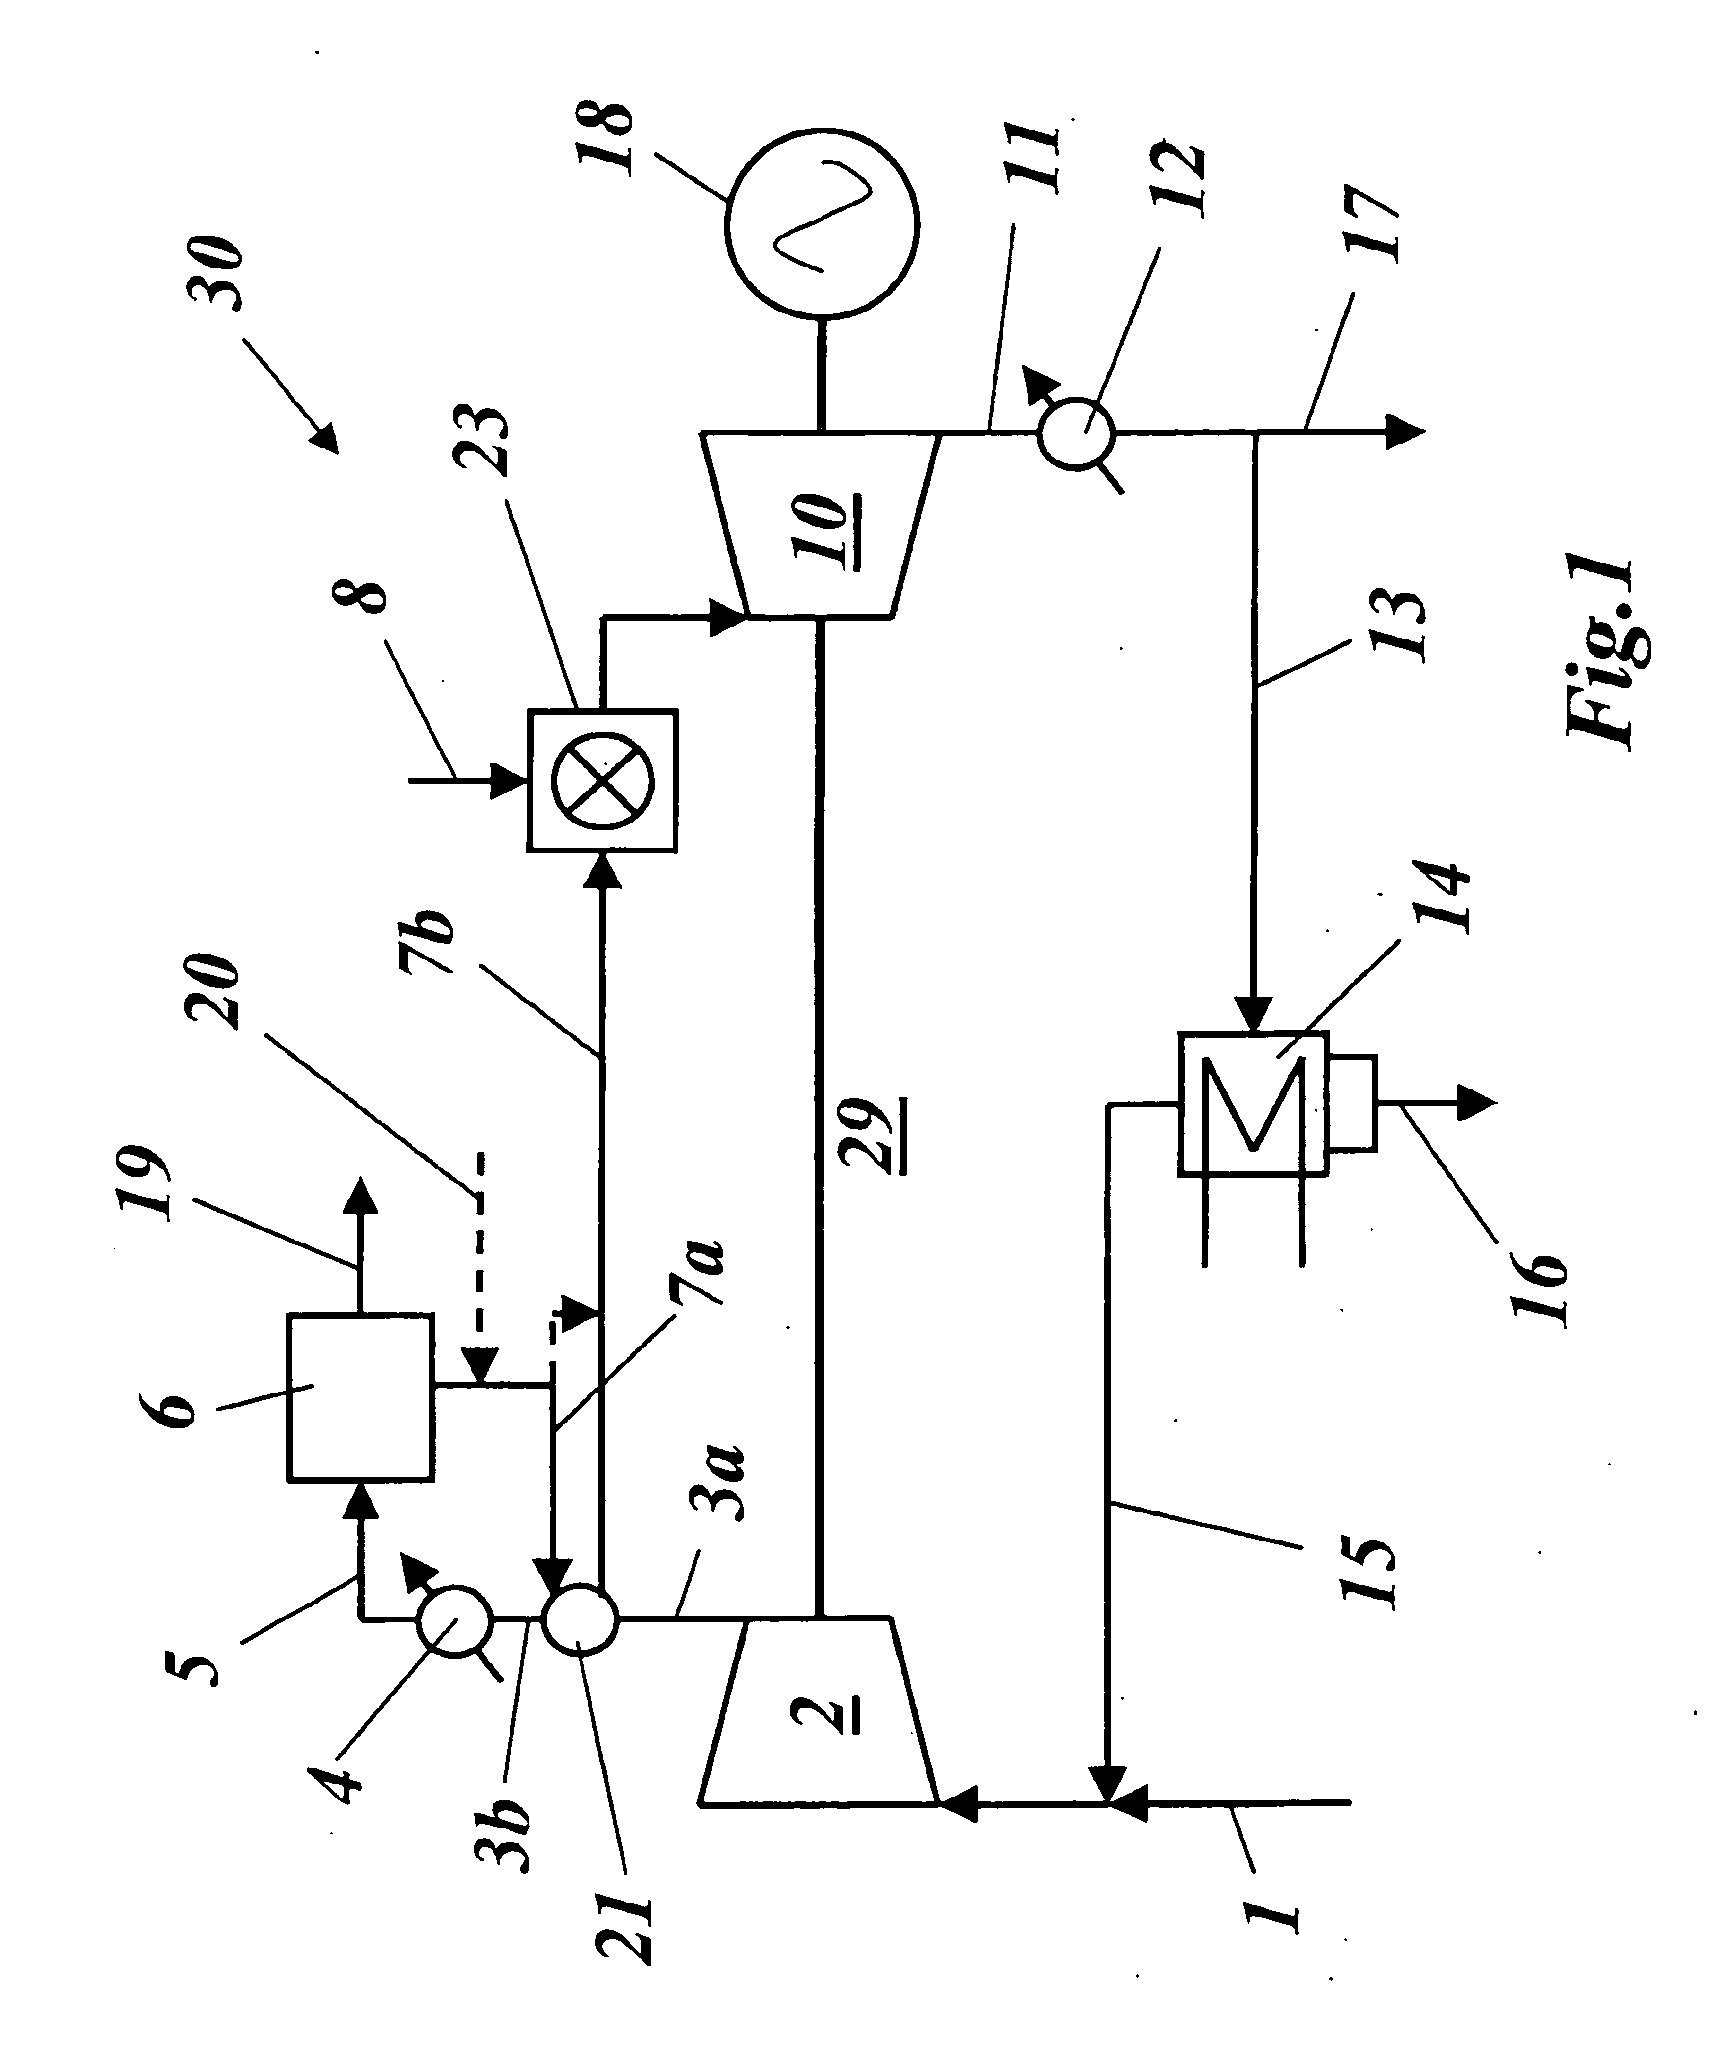 Method of generating energy in a power plant comprising a gas turbine, and power plant for carrying out the method